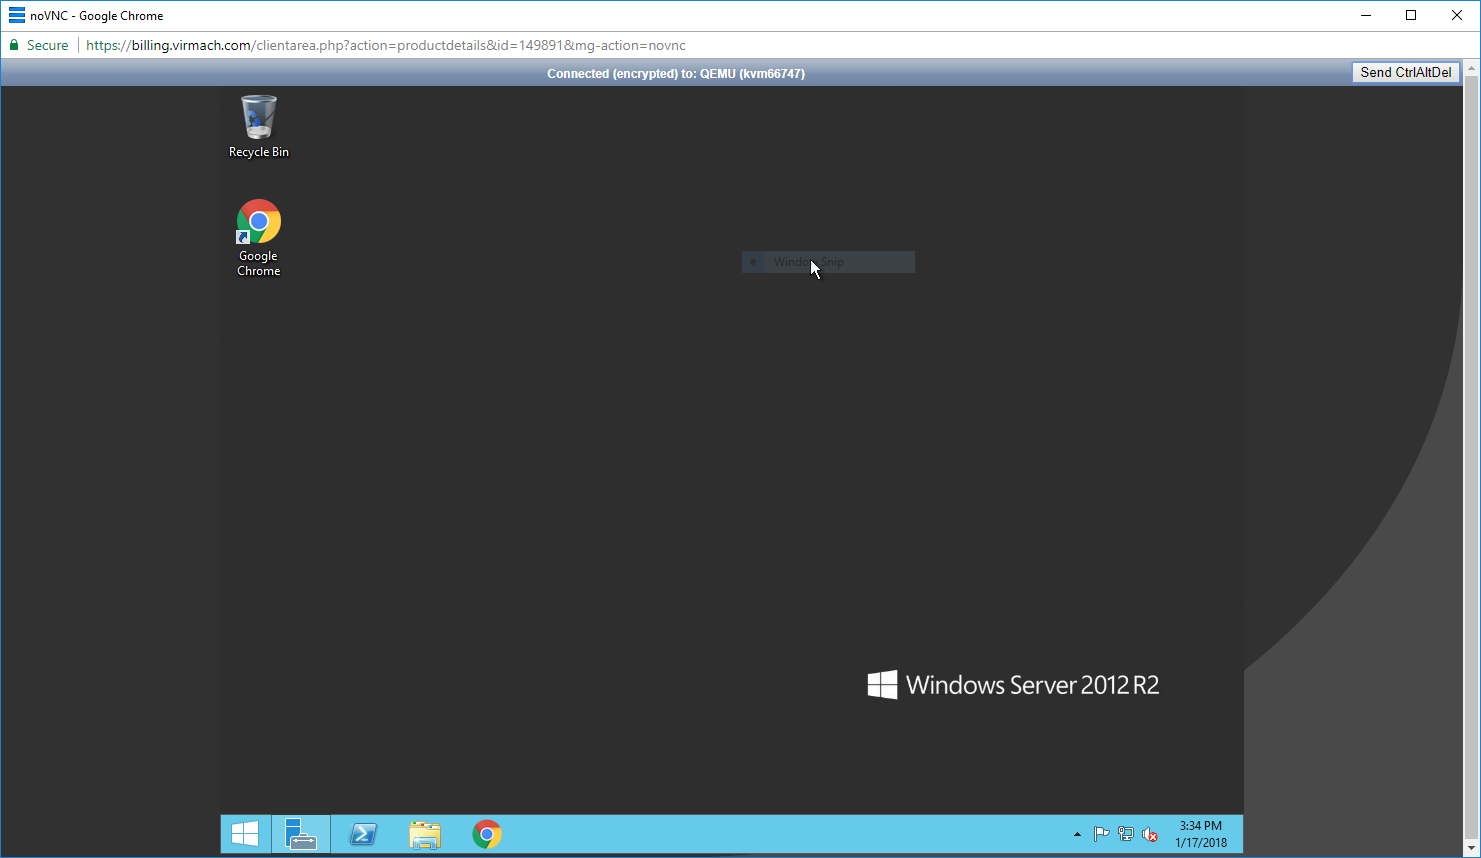 Windows VPS Server Logged In Image.PNG